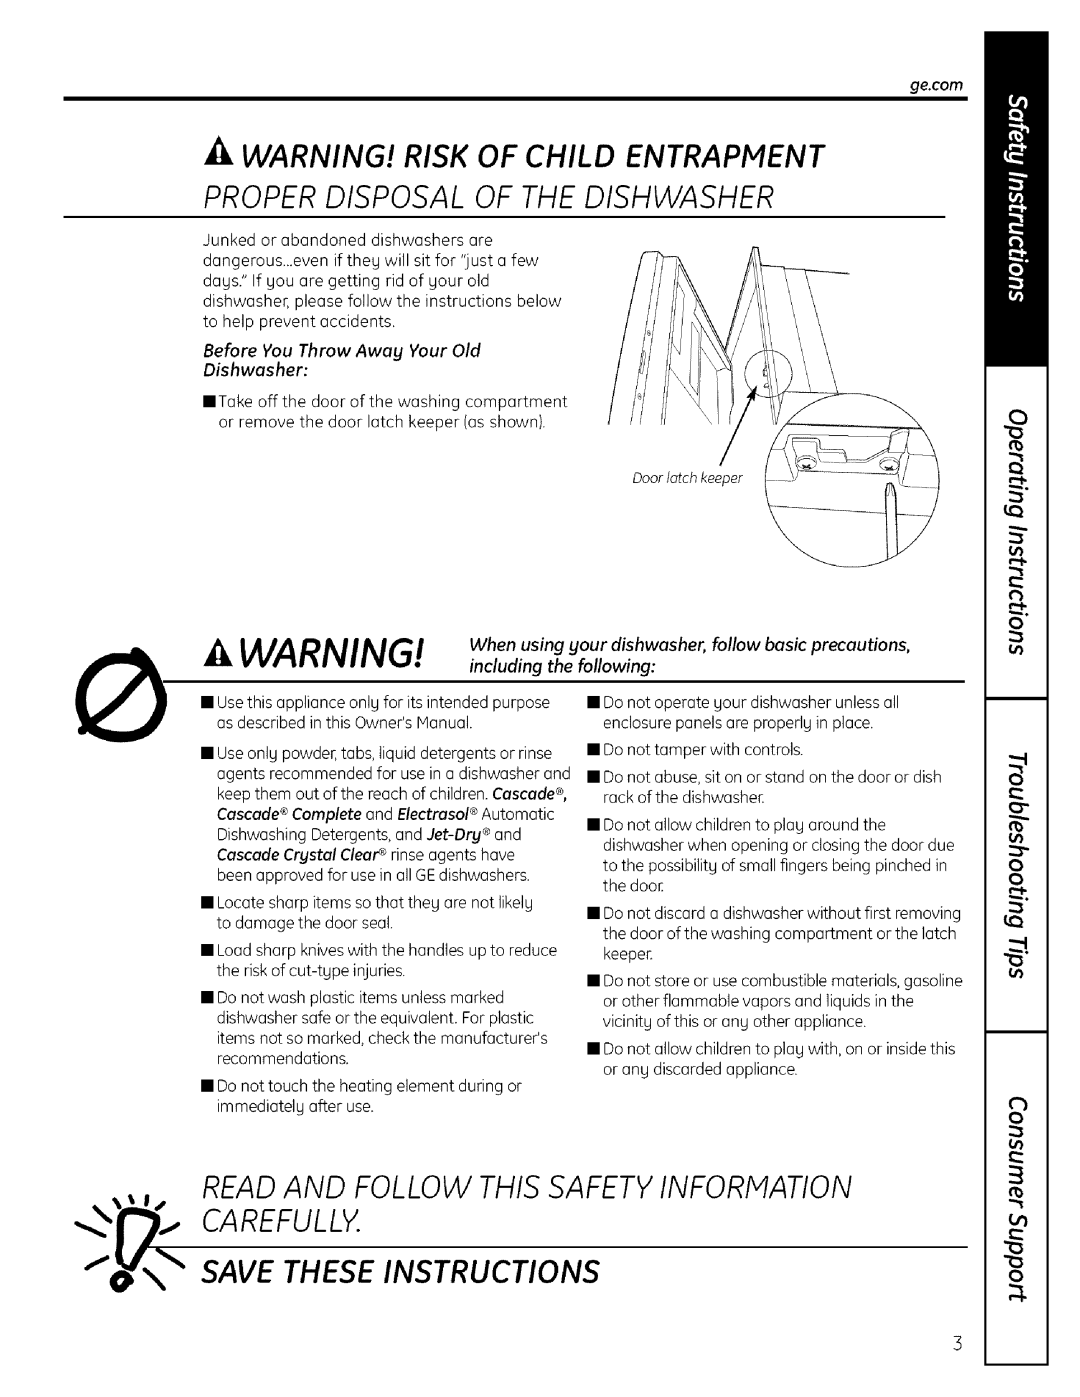 GE ADW! 000 SERIES operating instructions Properdisposal Of The Dishwasher, Readand Follow This Safetyinformation Carefully 